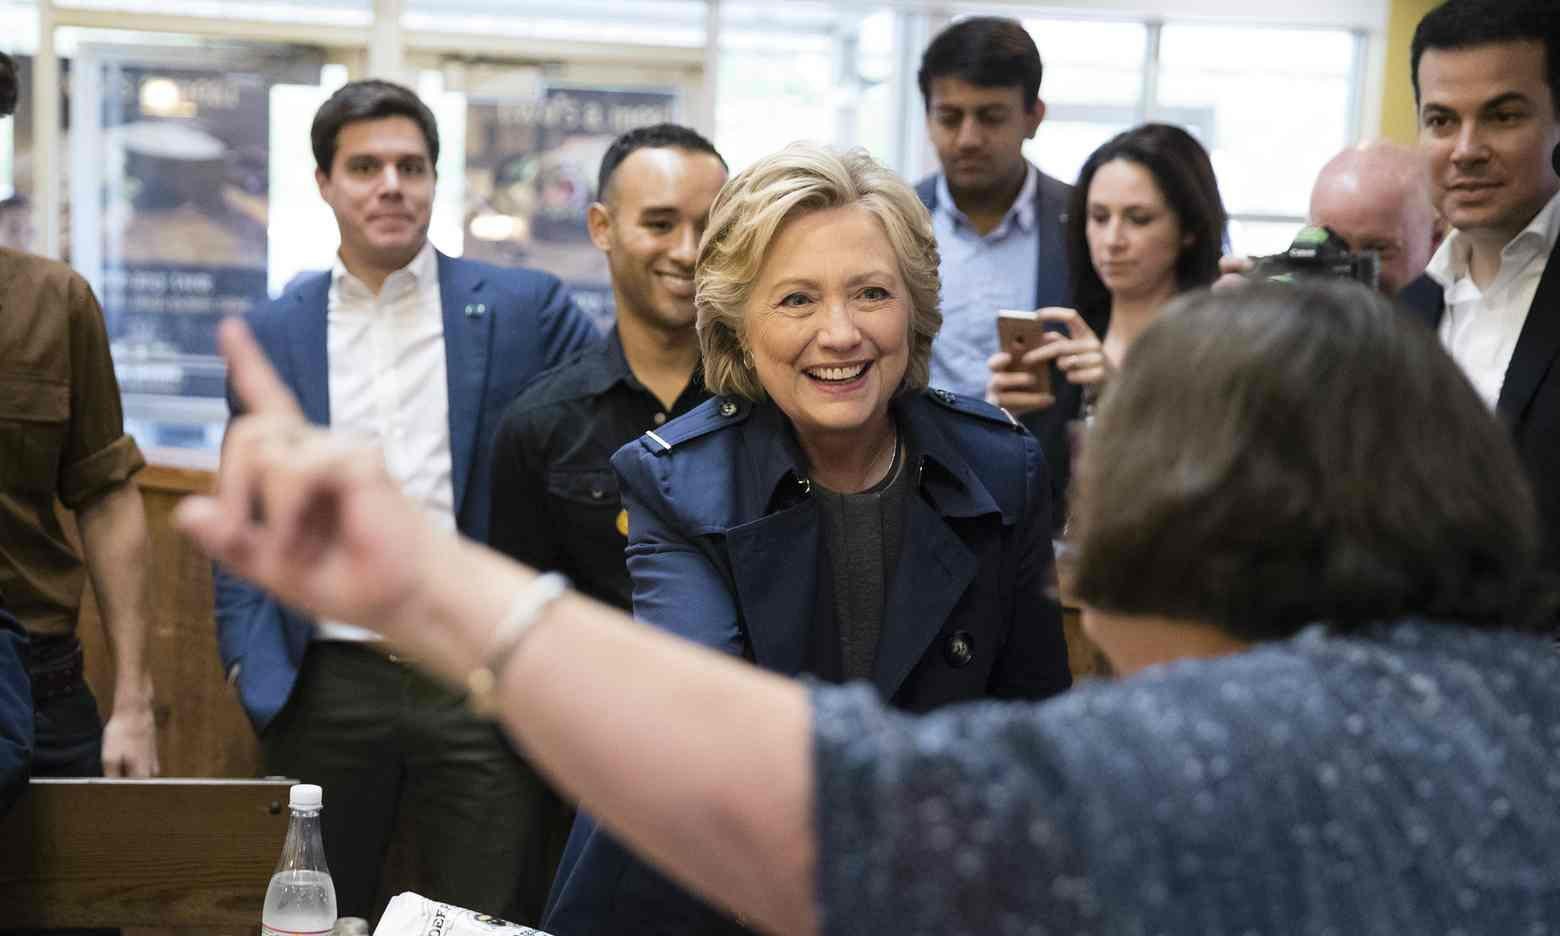 Hillary Clinton meets supporters during her visit to Durham, New Hampshire